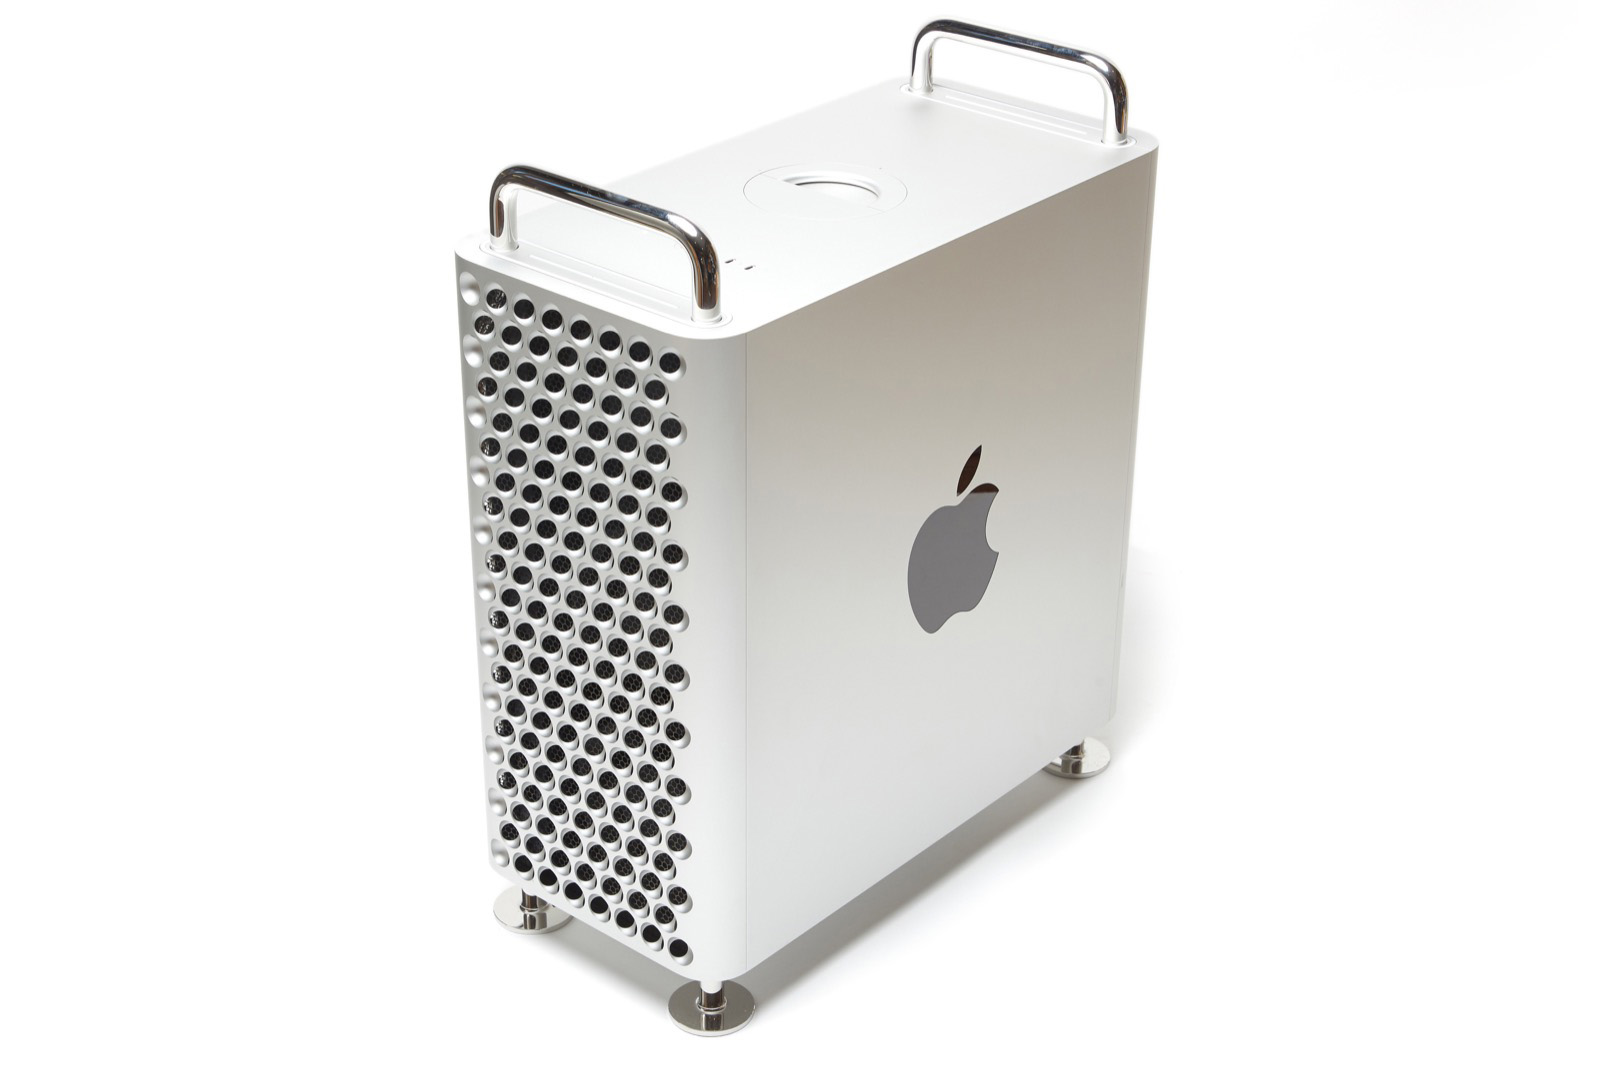 The Truth About Those Ridiculous Mac Pro Wheels